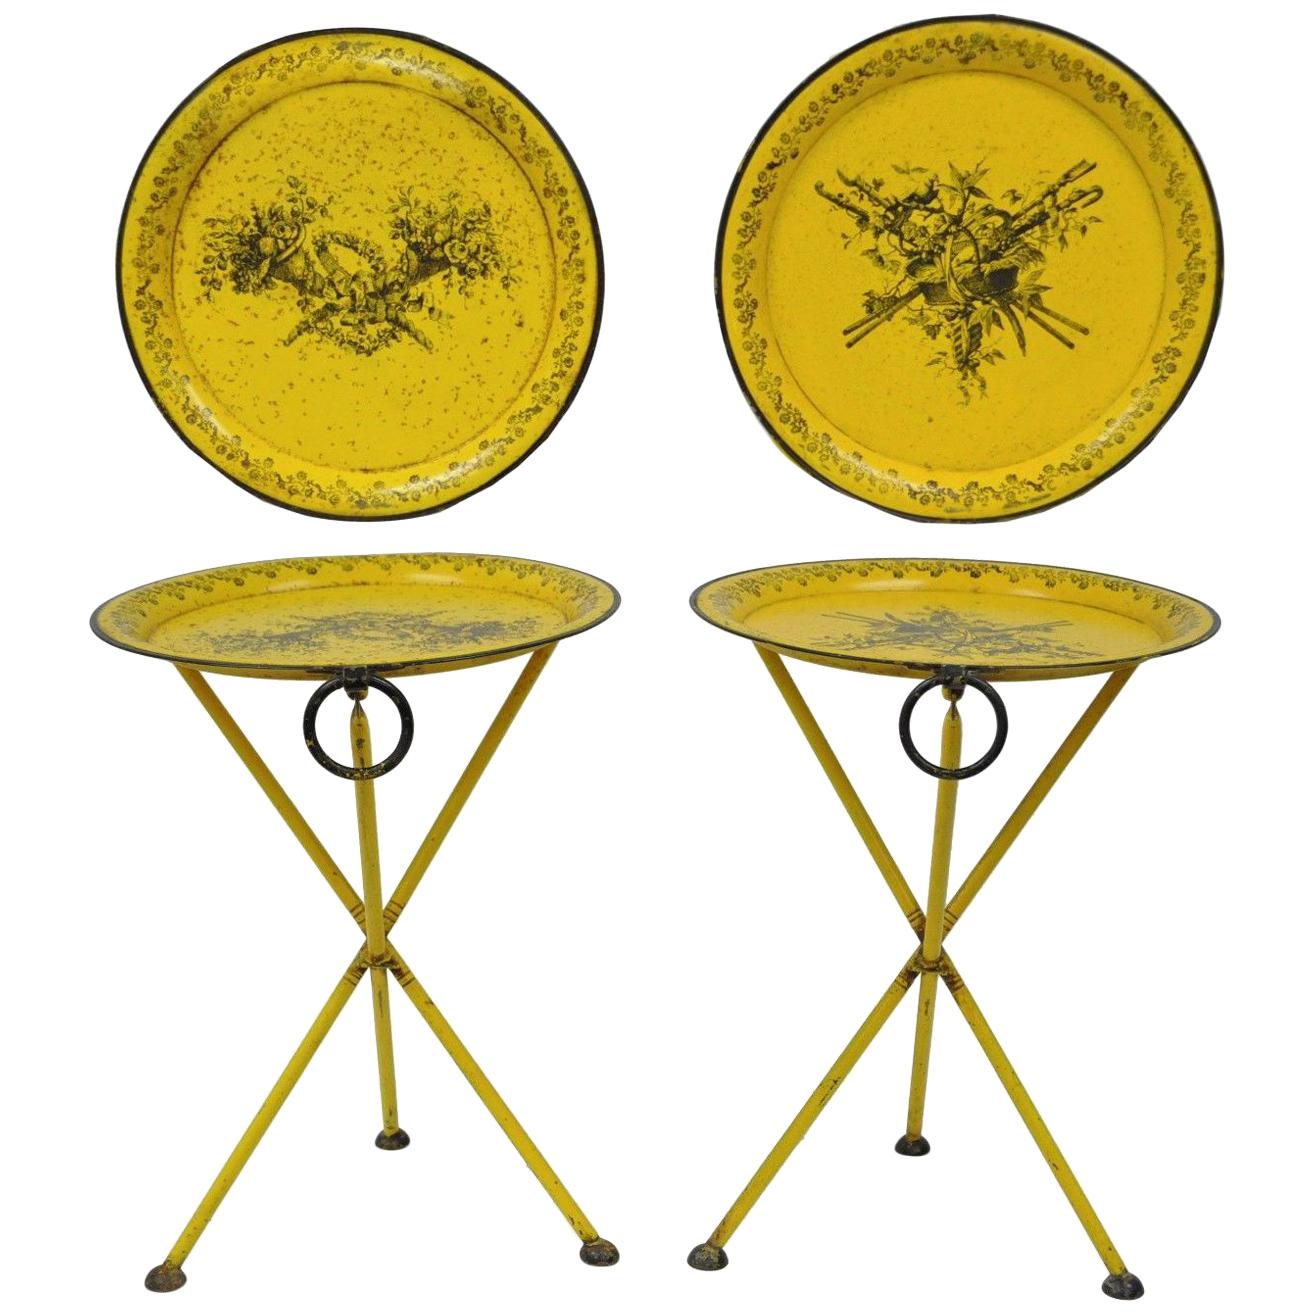 Pair of Italian Neoclassical Tole Metal Folding Side Tables Yellow Harvest